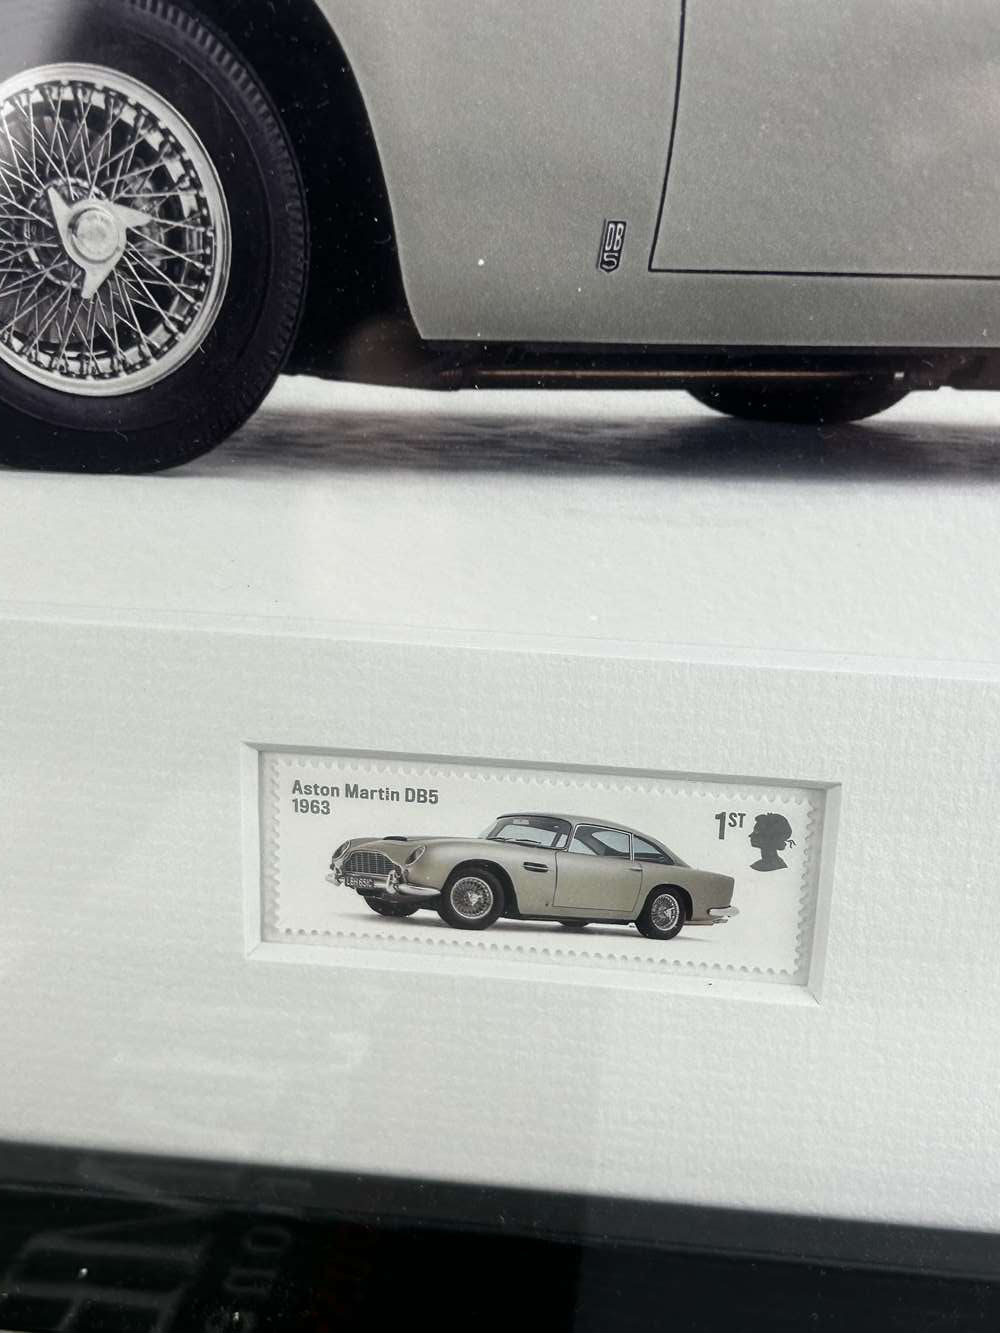 British Auto Legends -Aston Martin DB5 Framed Picture &#038; 1st Class Stamp Montage. - Image 6 of 6